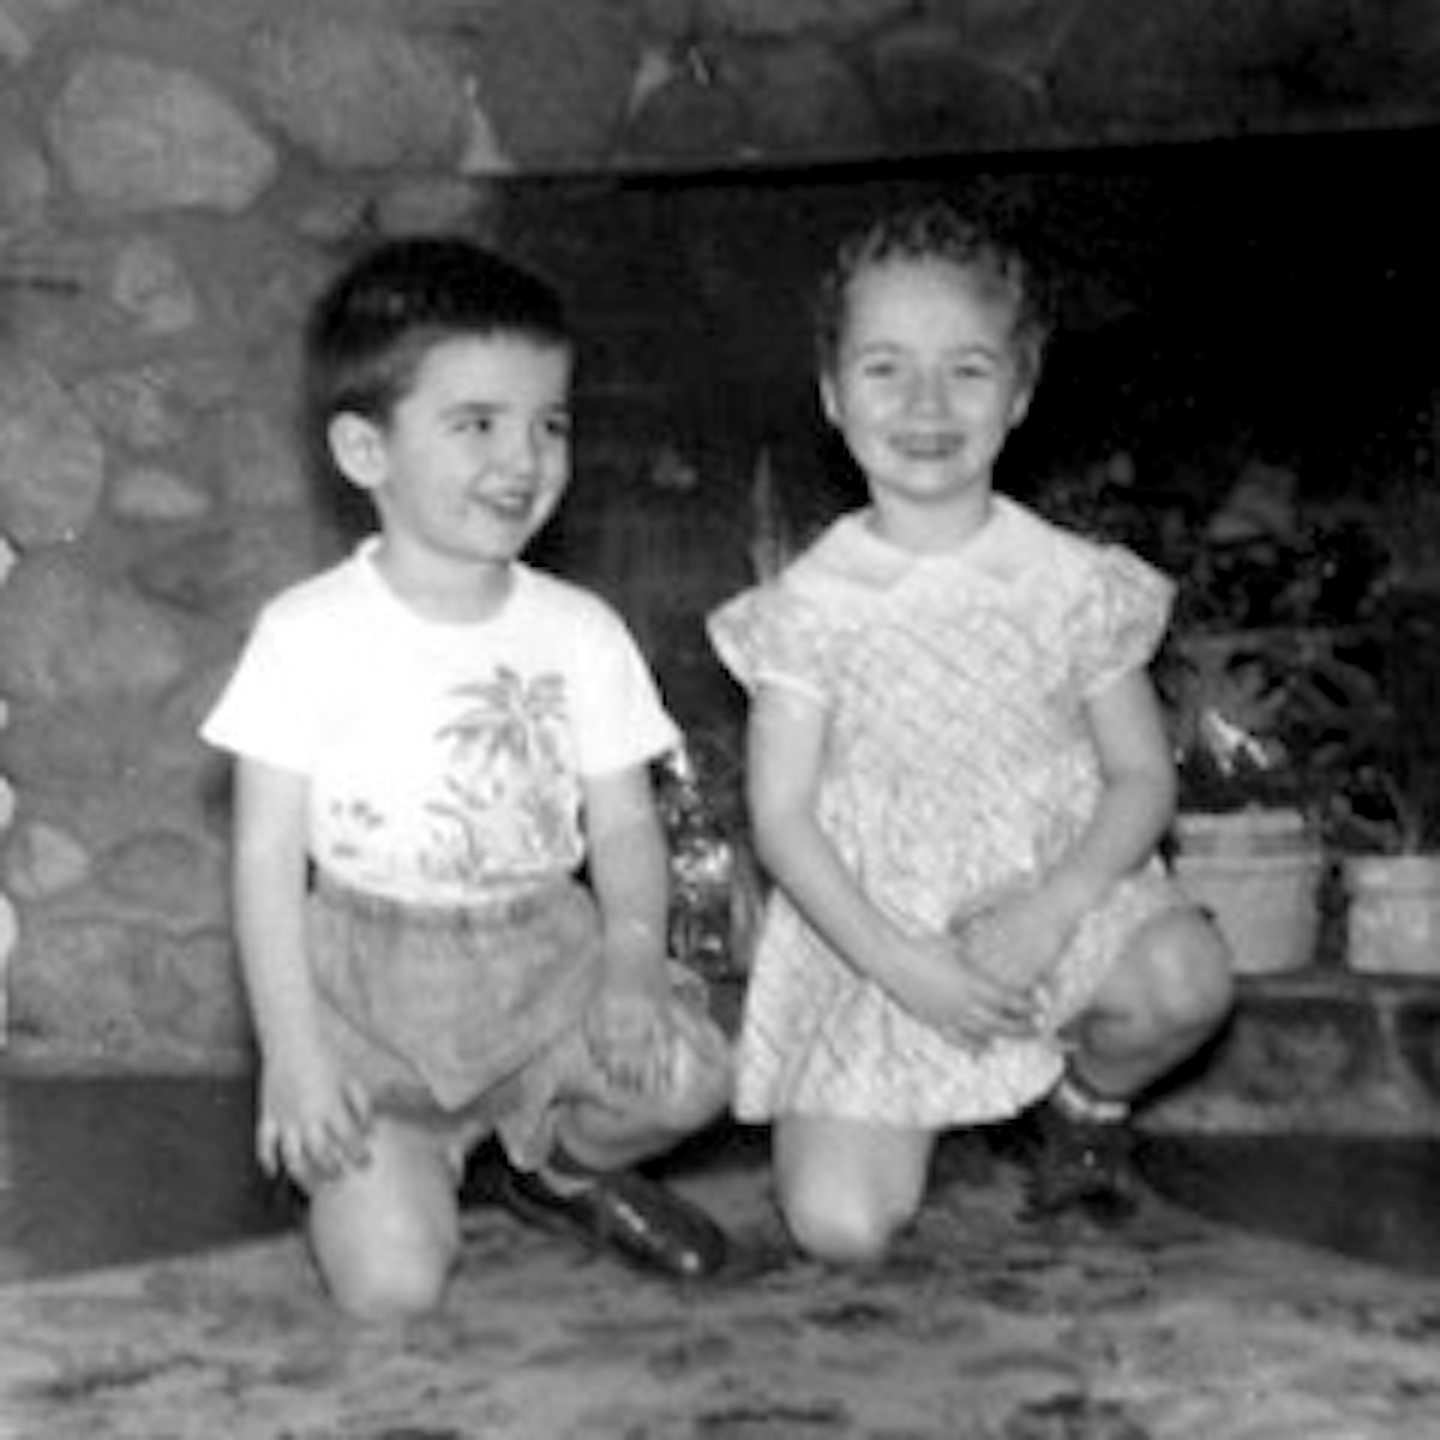 Ron (age 3) and his sister in Logansport, Indiana, 1951.